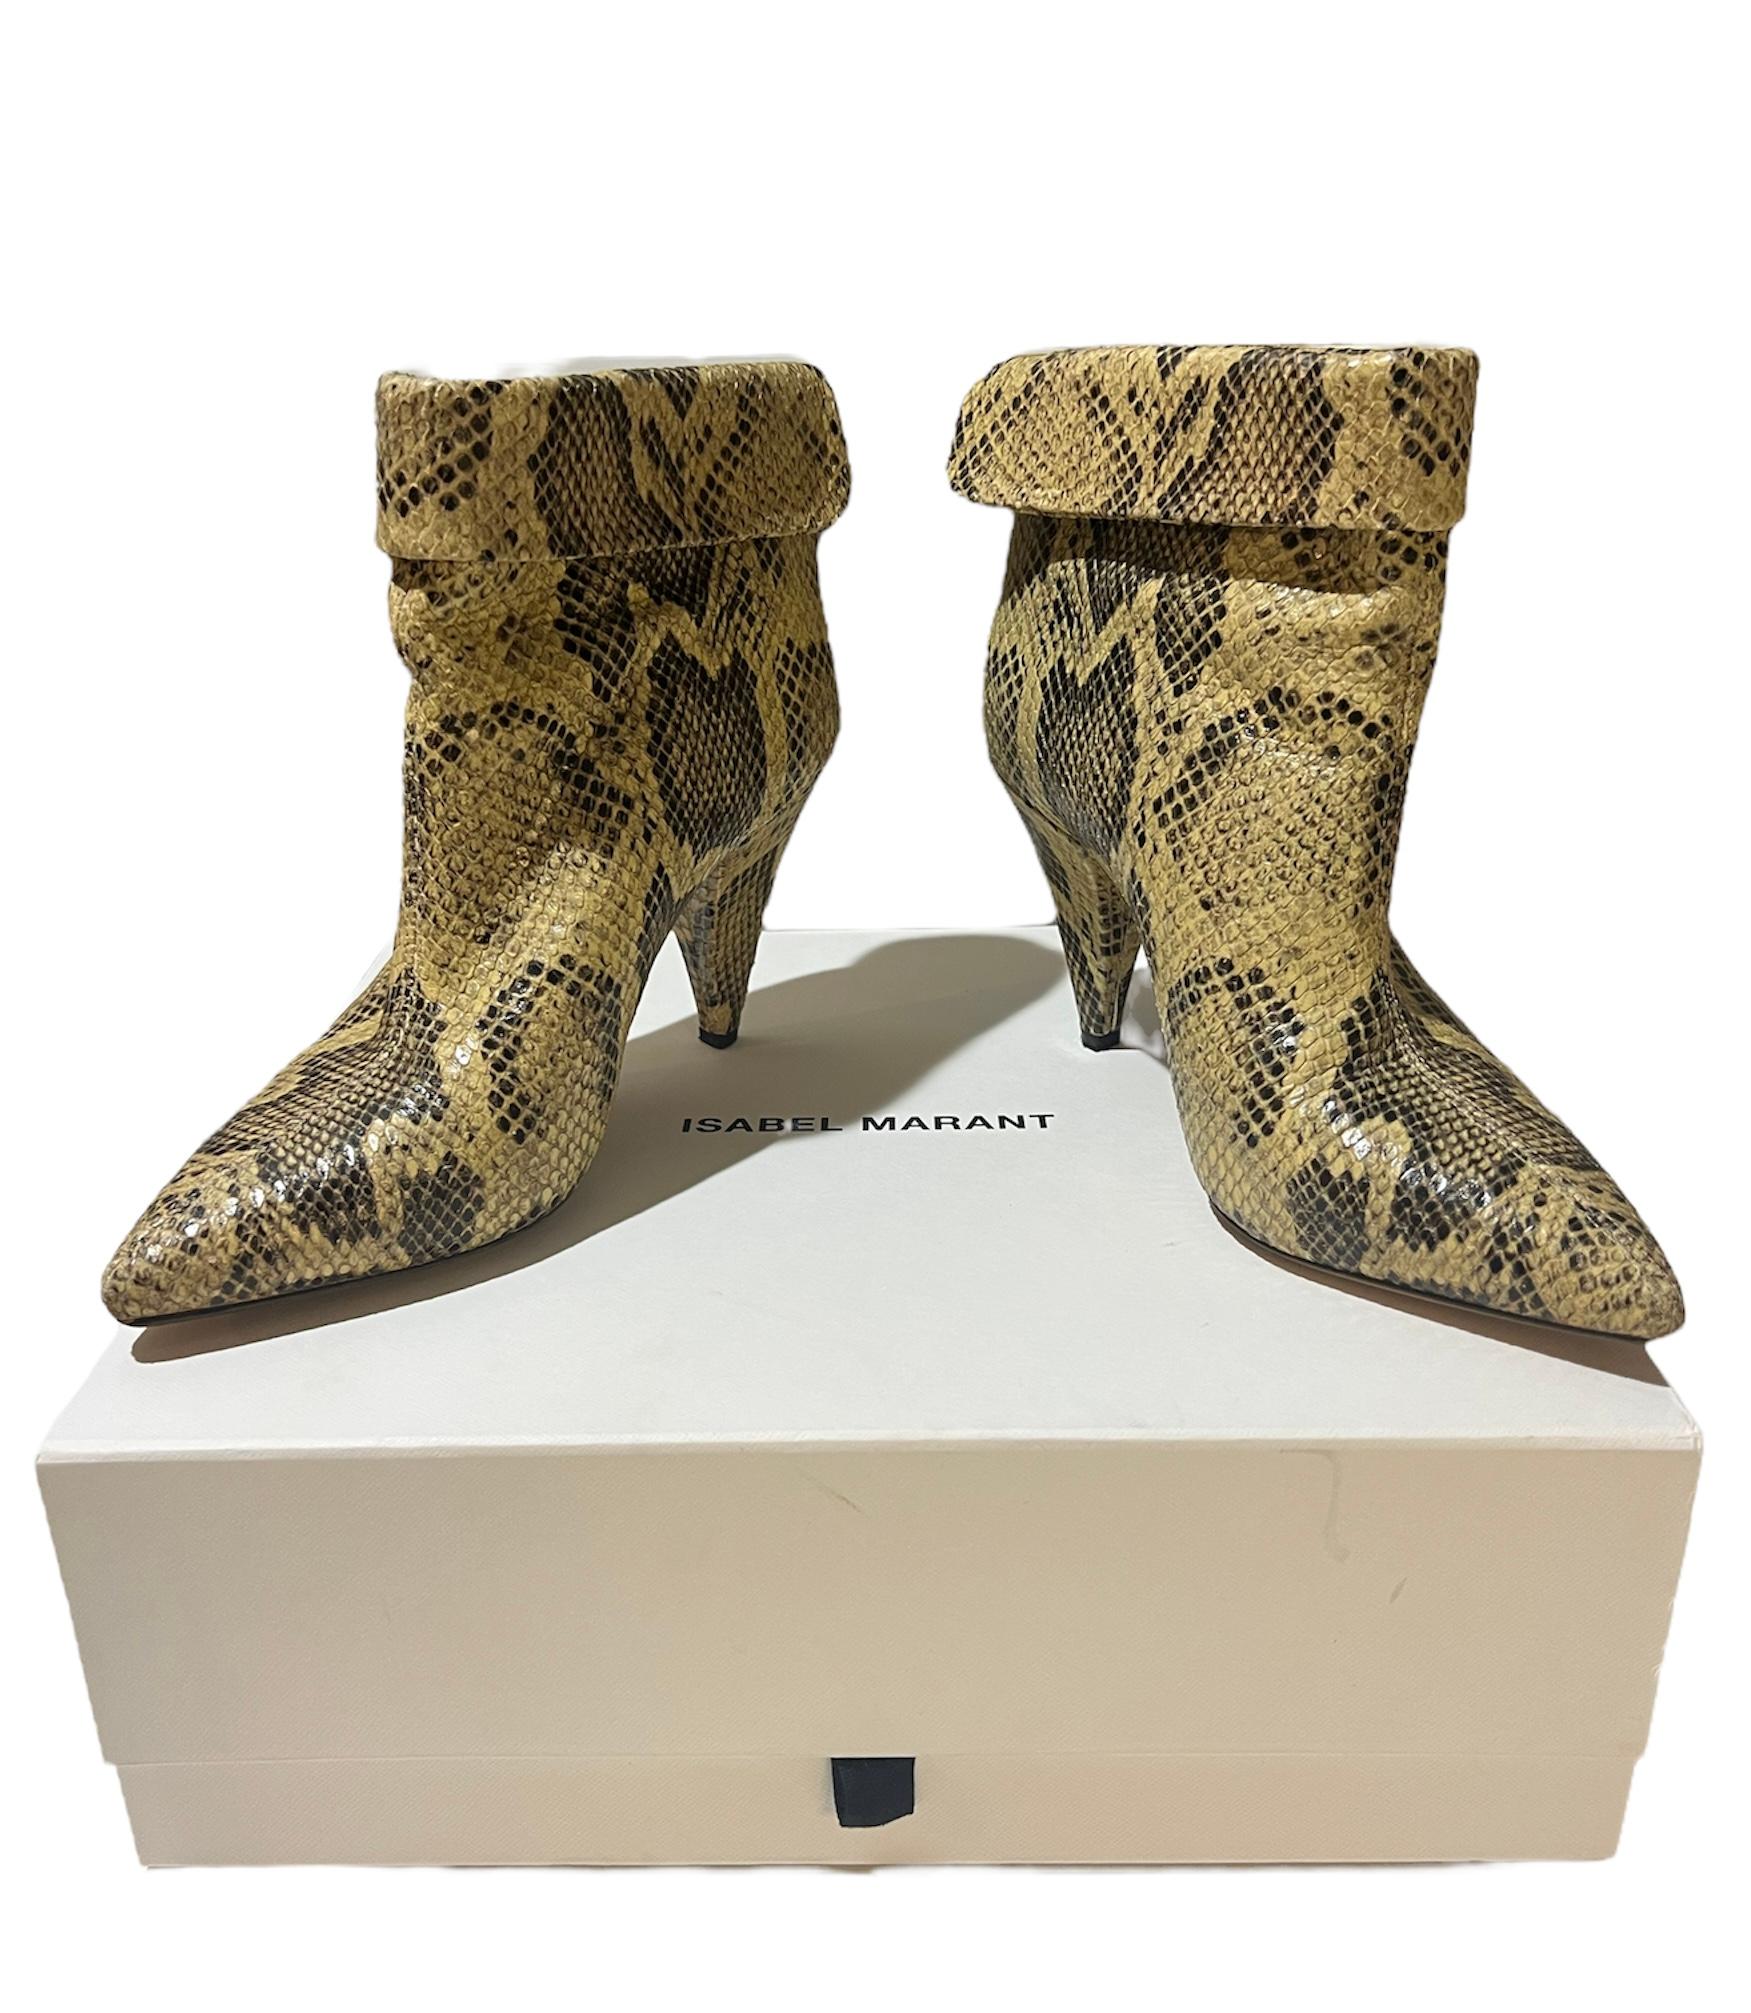 Isabel Marant Exotic Skin  Booties, Size 39 For Sale 4